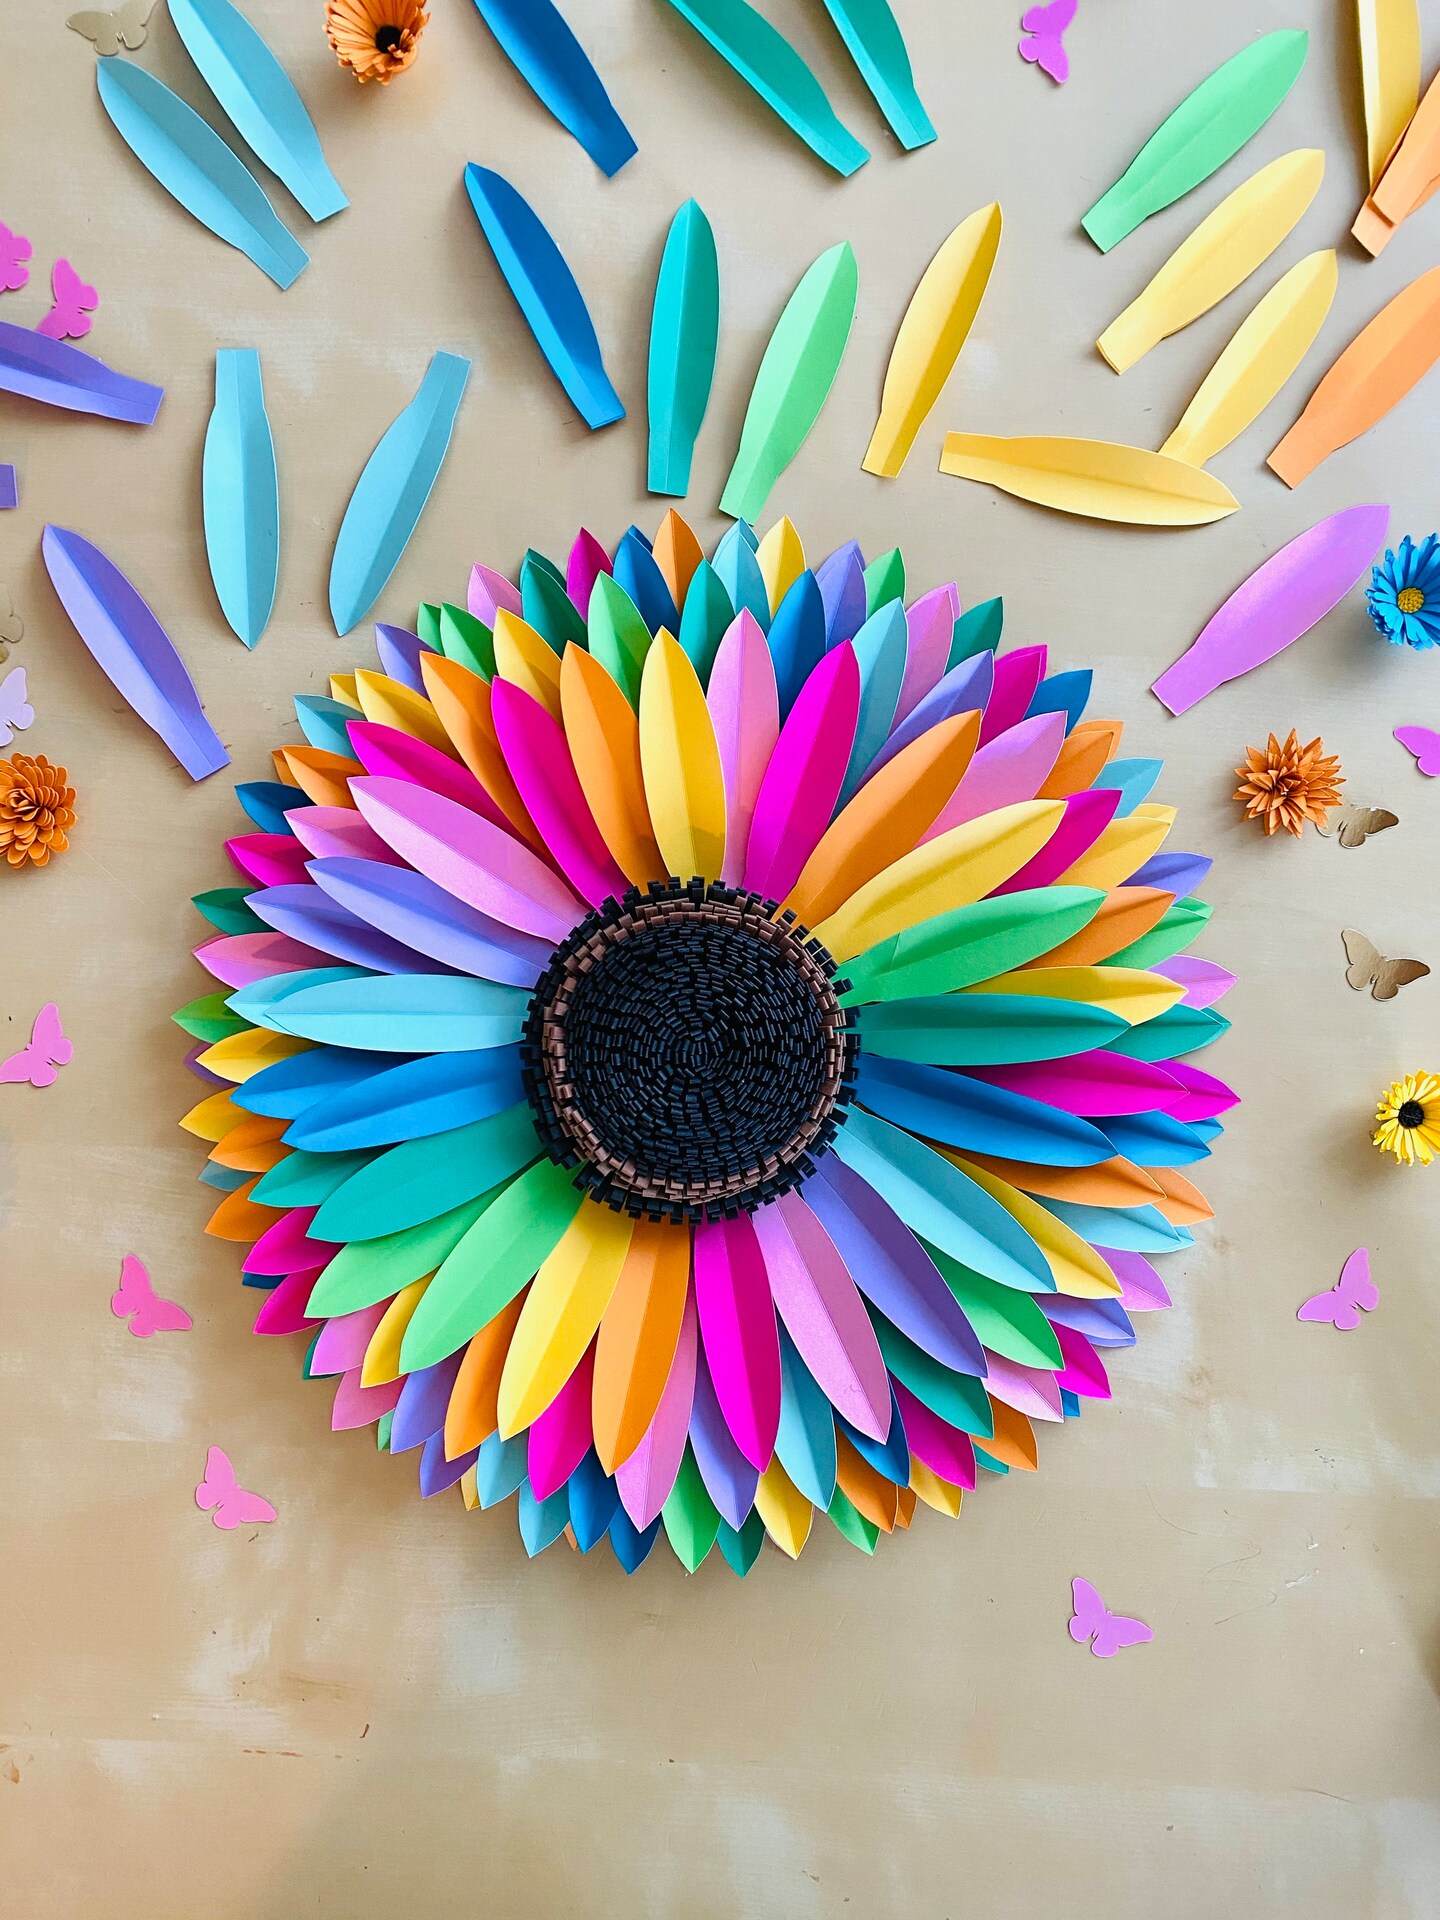 How to Make a Giant Paper Flower ~ Construction Paper Crafts for